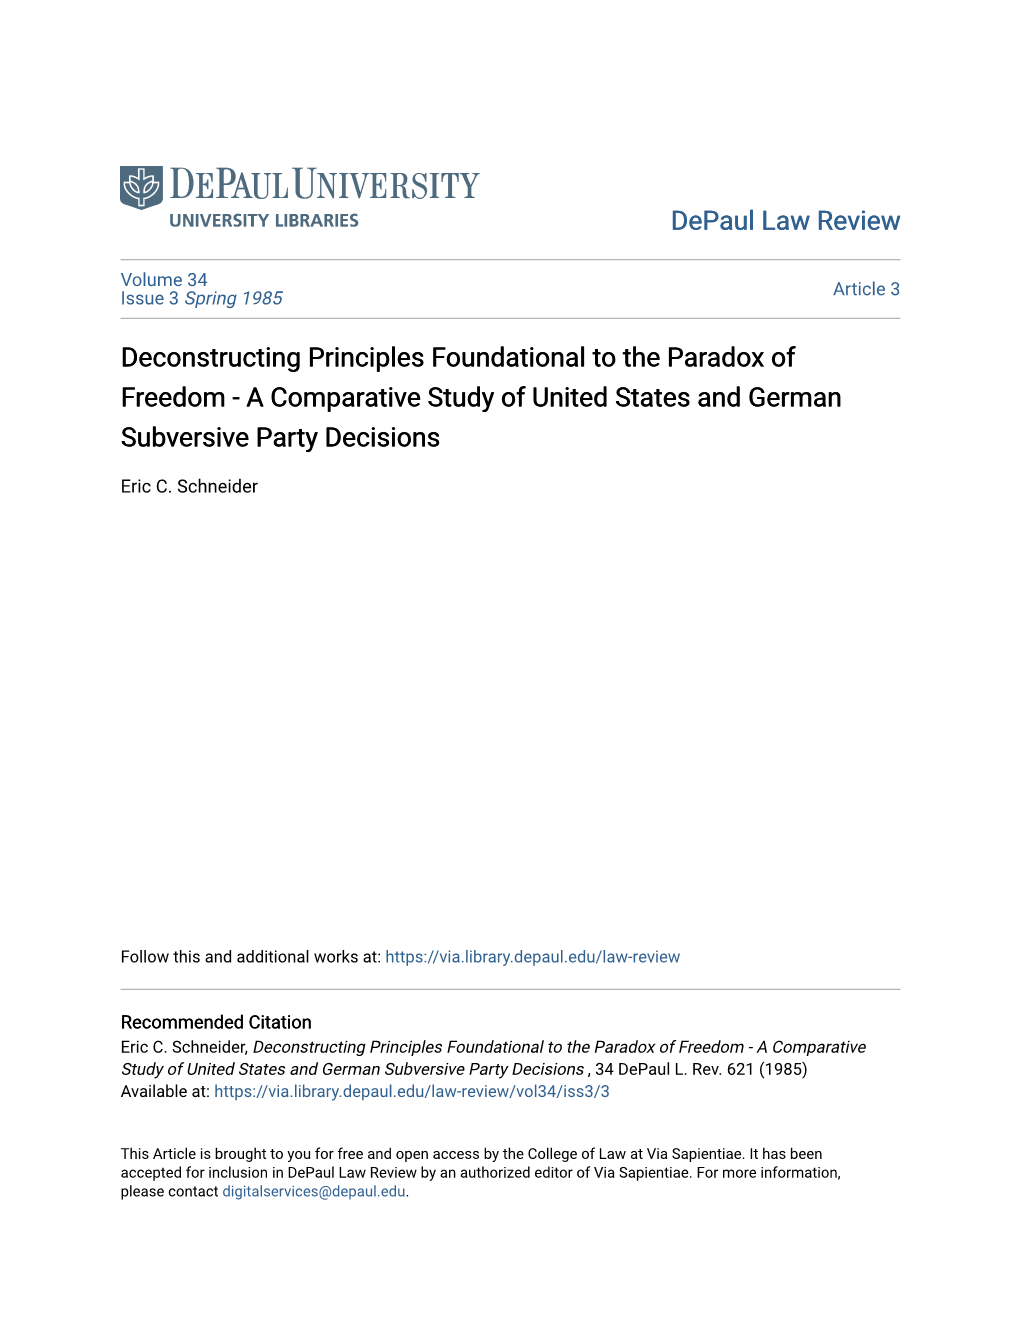 Deconstructing Principles Foundational to the Paradox of Freedom - a Comparative Study of United States and German Subversive Party Decisions